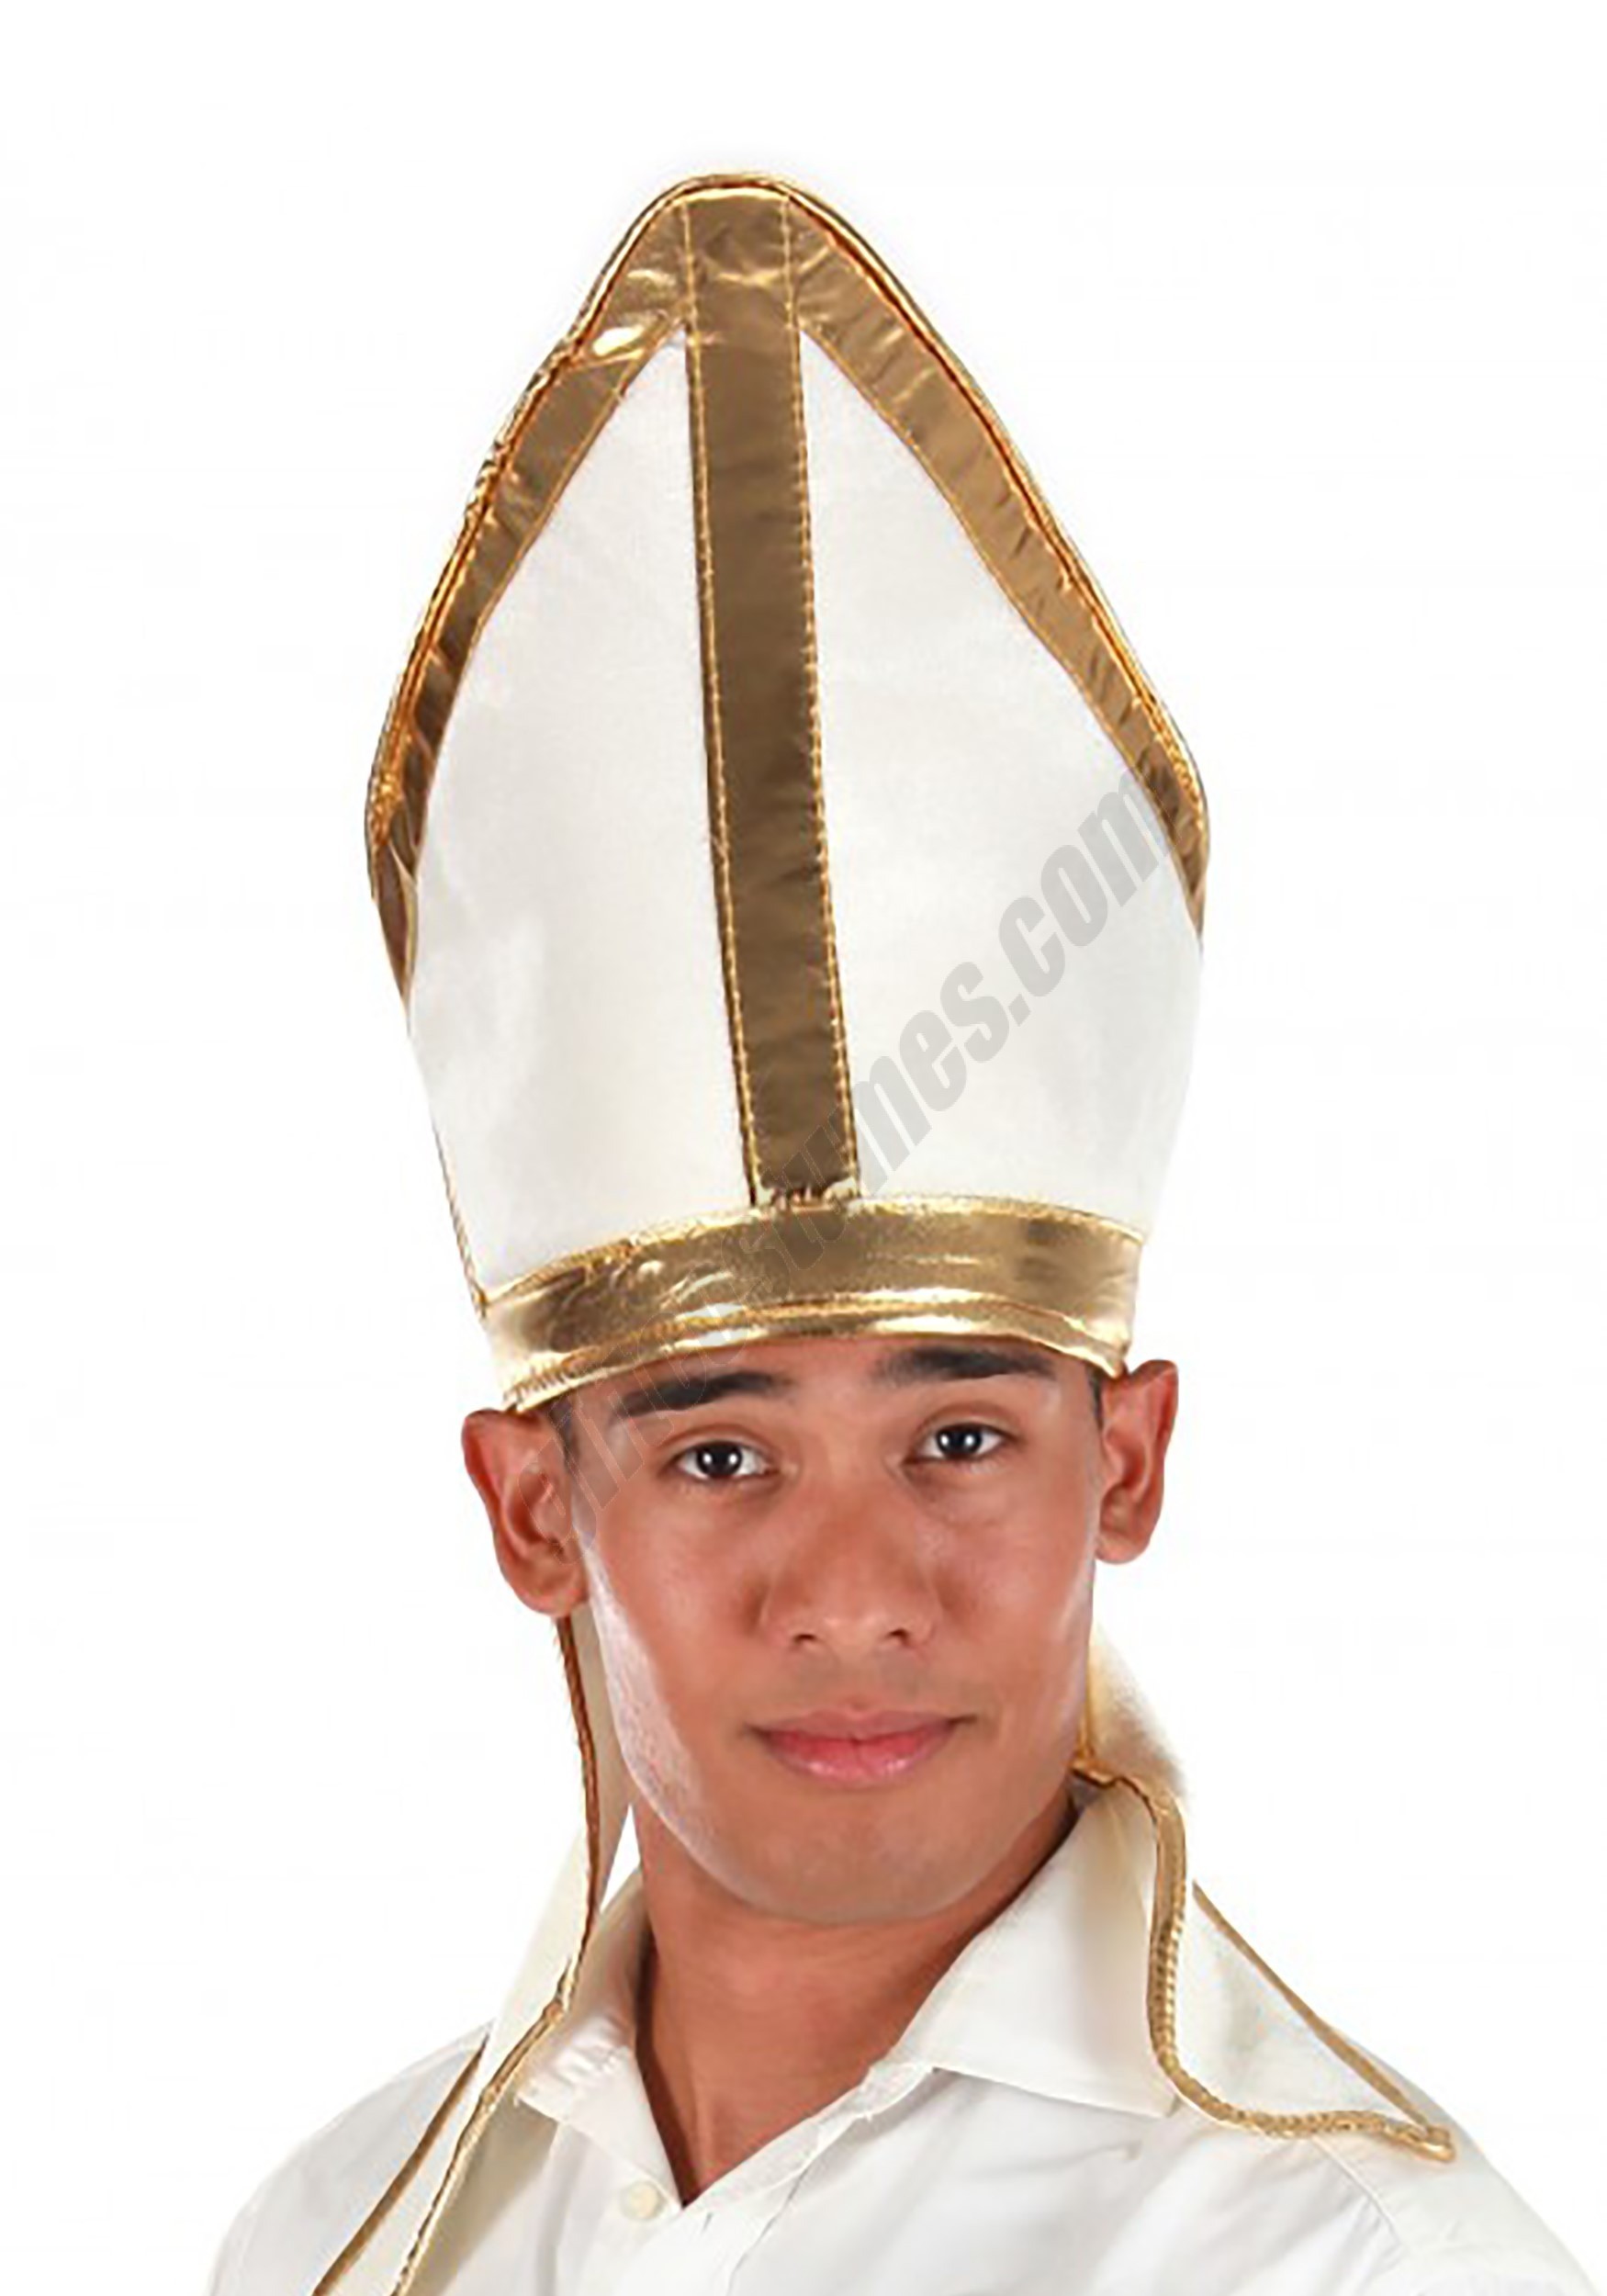 White Pope Plush Hat Promotions - White Pope Plush Hat Promotions